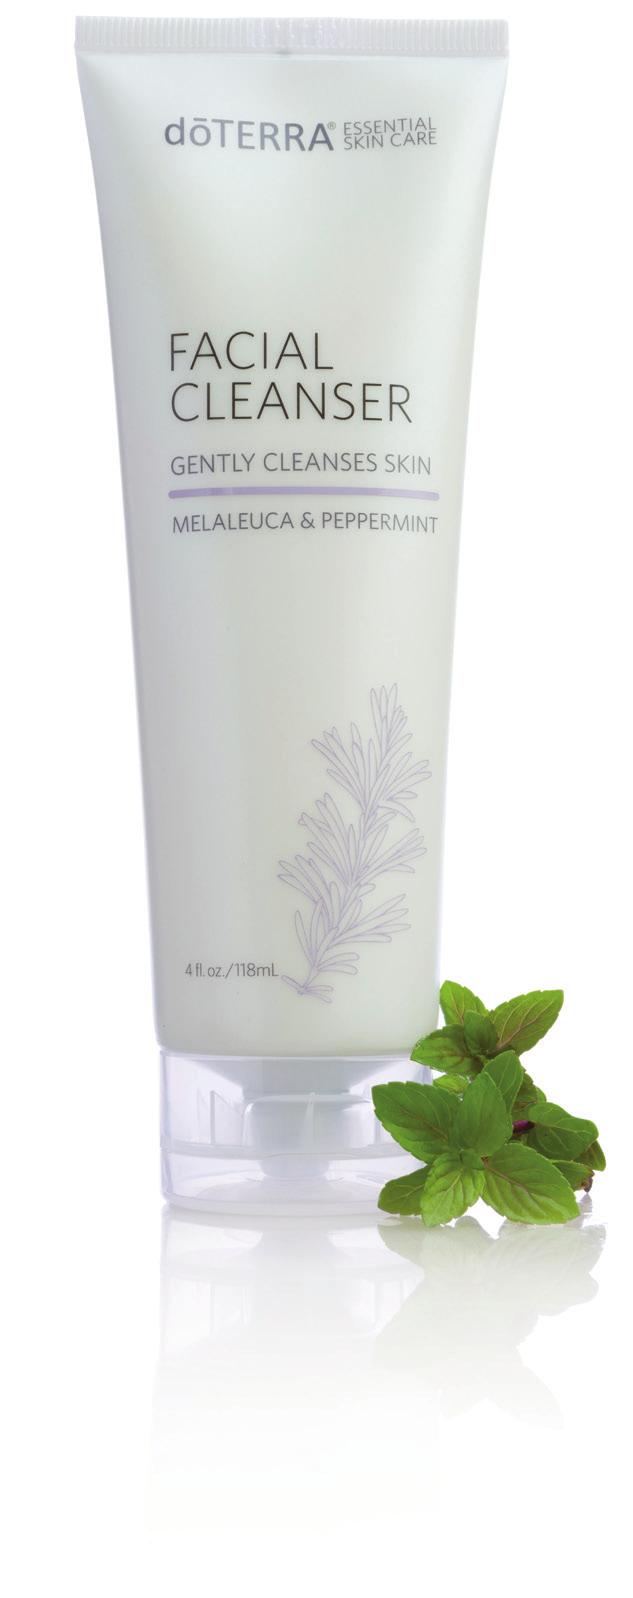 FACIAL CLEANSER essential oils of MELALEUCA and PEPPERMINT dōterra Facial Cleanser combines CPTG Certified Pure Therapeutic Grade essential oils of Melaleuca and Peppermint, known for their ability